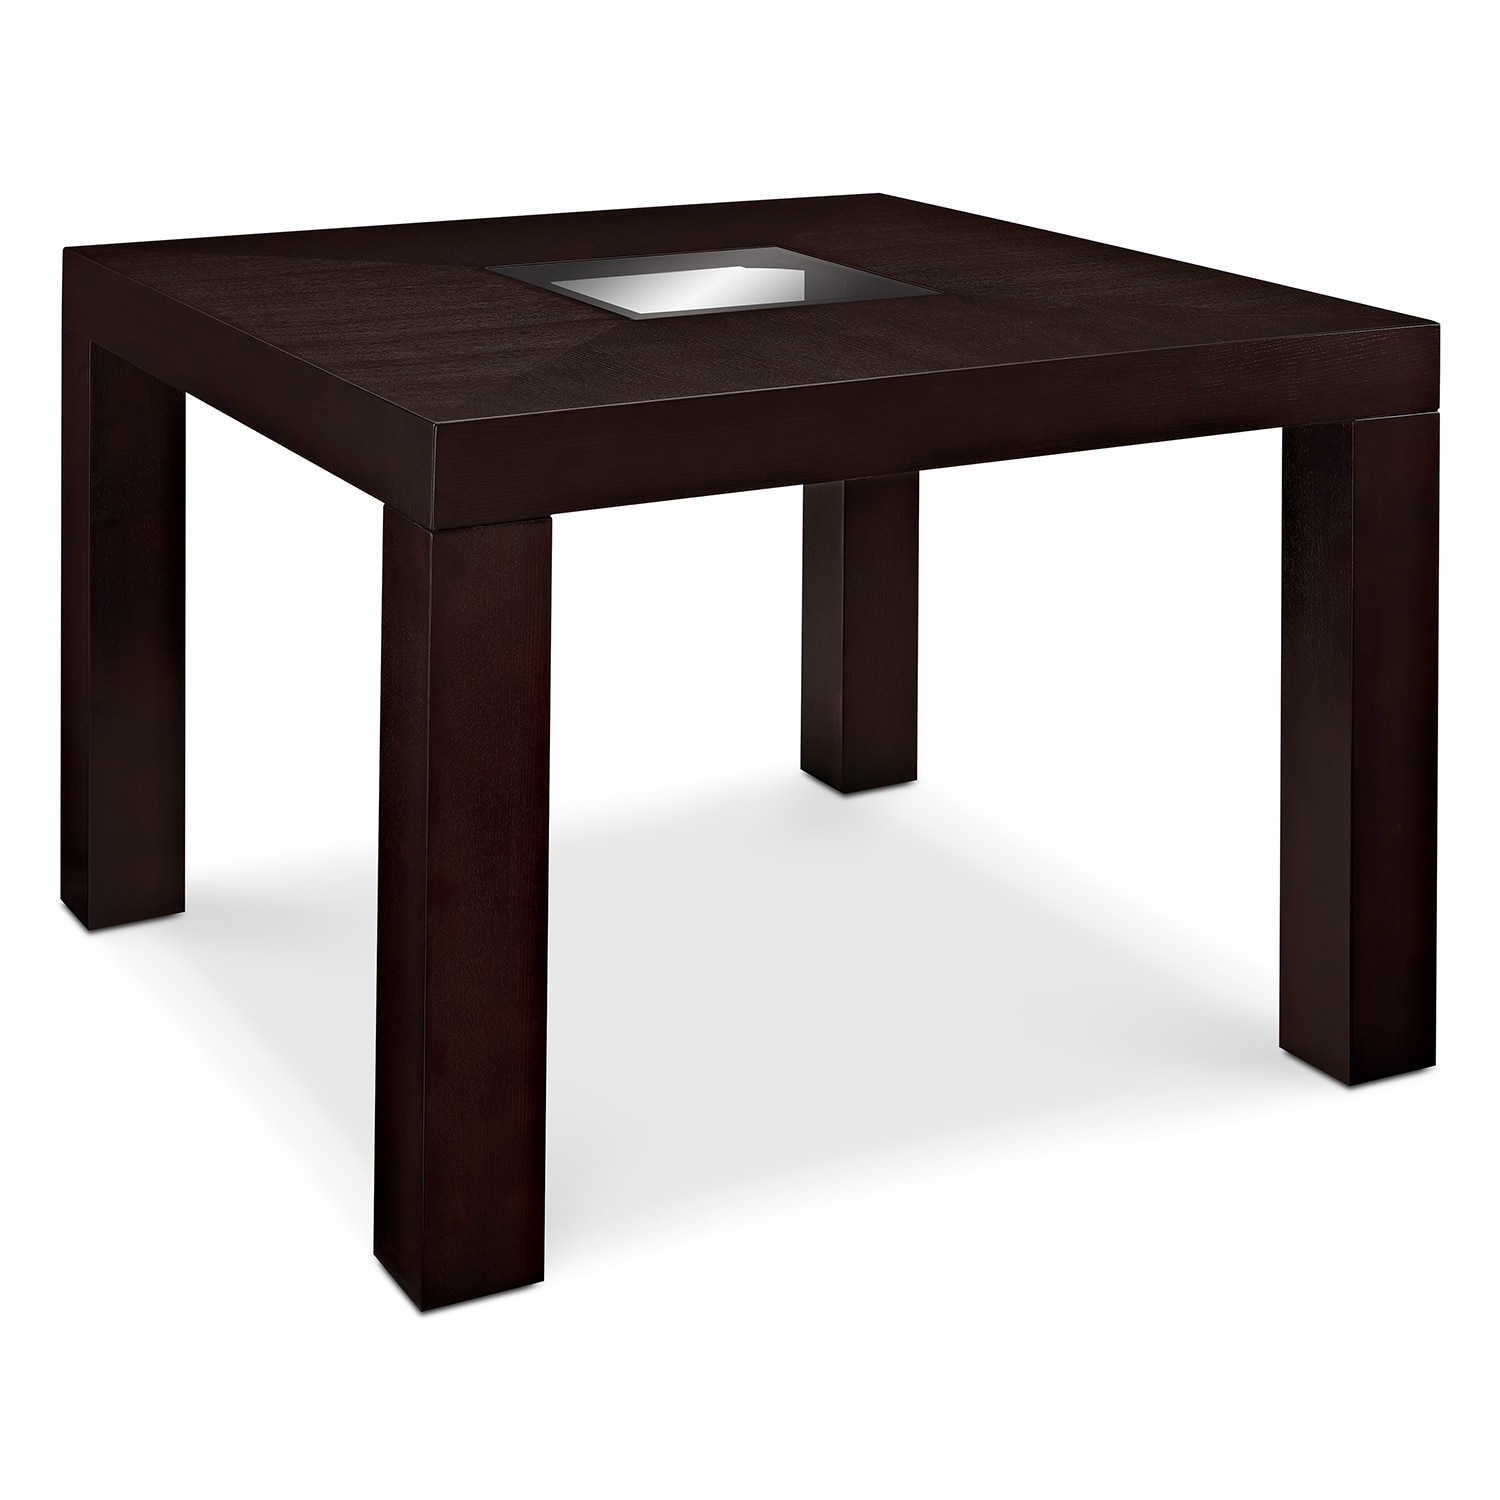 Dining Room Tables: Dining Room Tables Value City